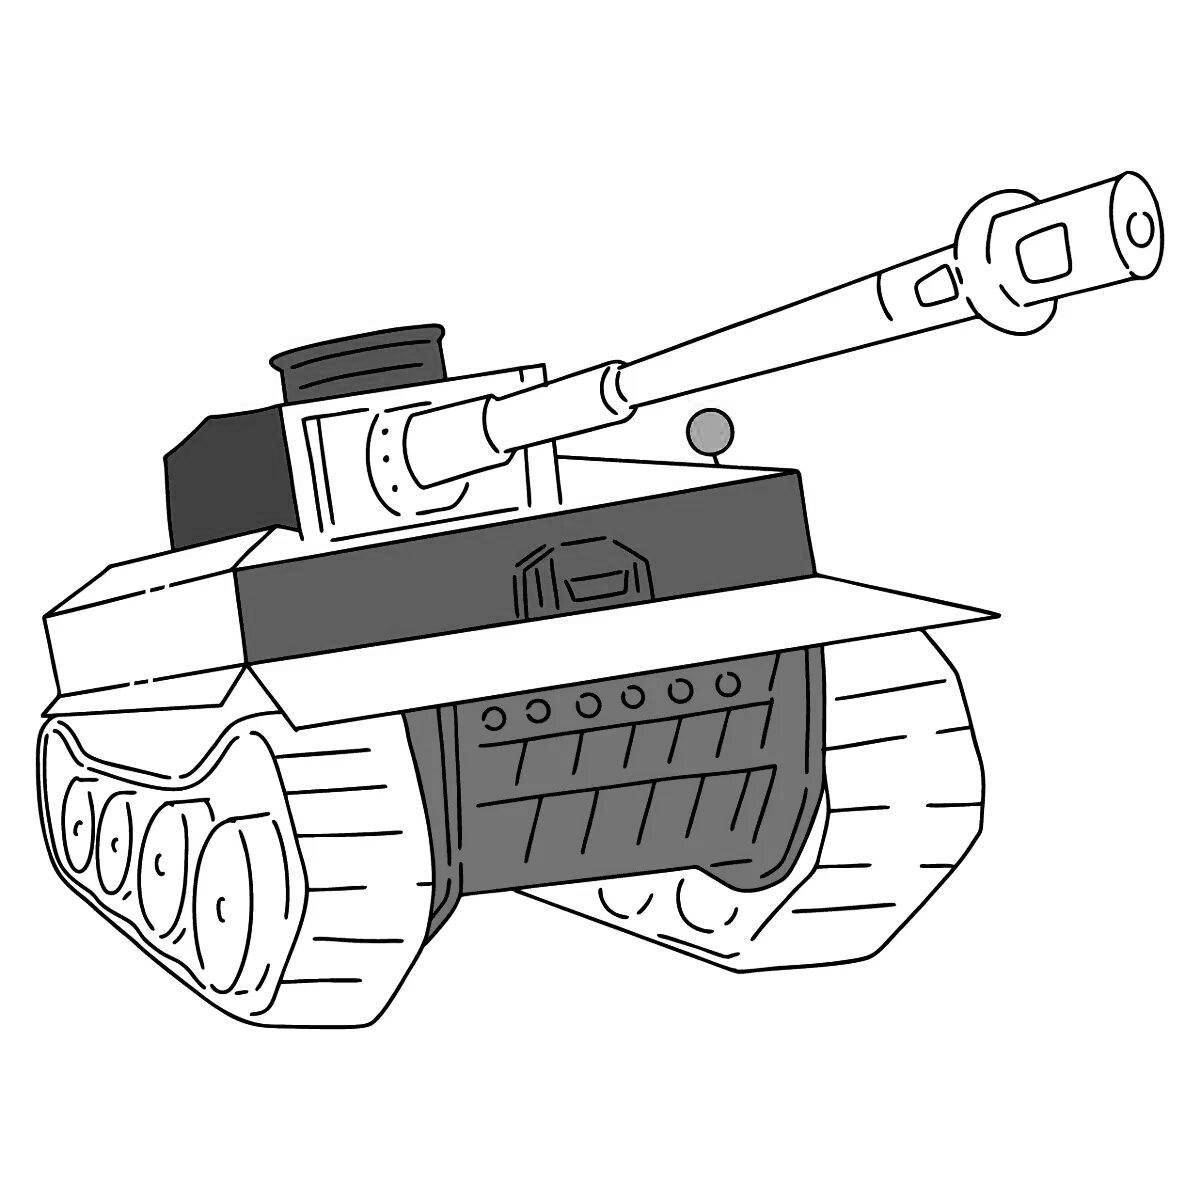 Bright coloring panther tank